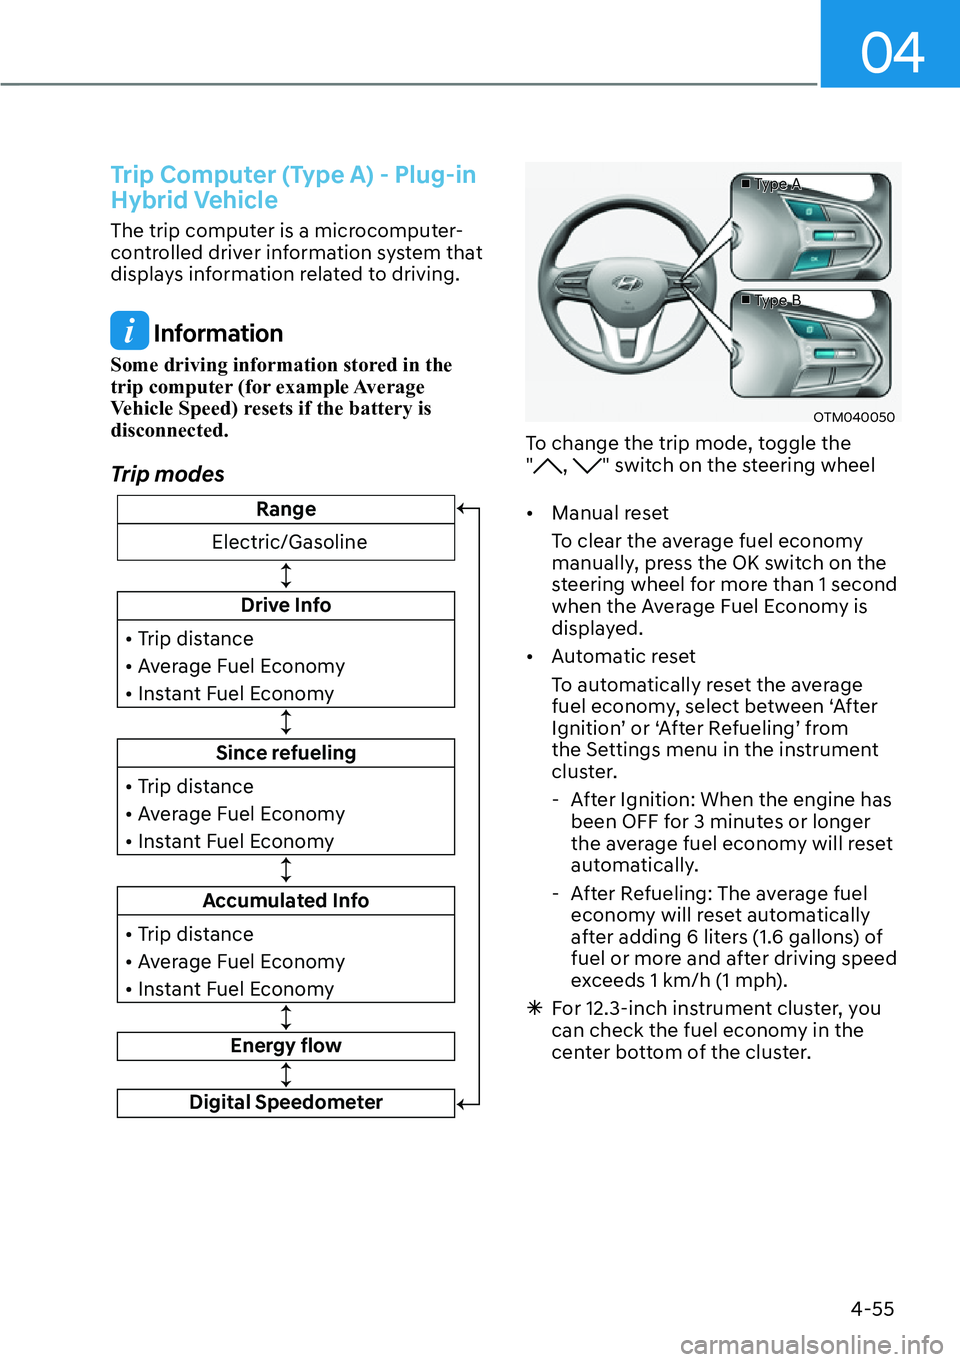 HYUNDAI SANTA FE HYBRID 2022  Owners Manual 04
4-55
Trip Computer (Type A) - Plug-in  
Hybrid Vehicle
The trip computer is a microcomputer- 
controlled driver information system that 
displays information related to driving.
 Information
Some d